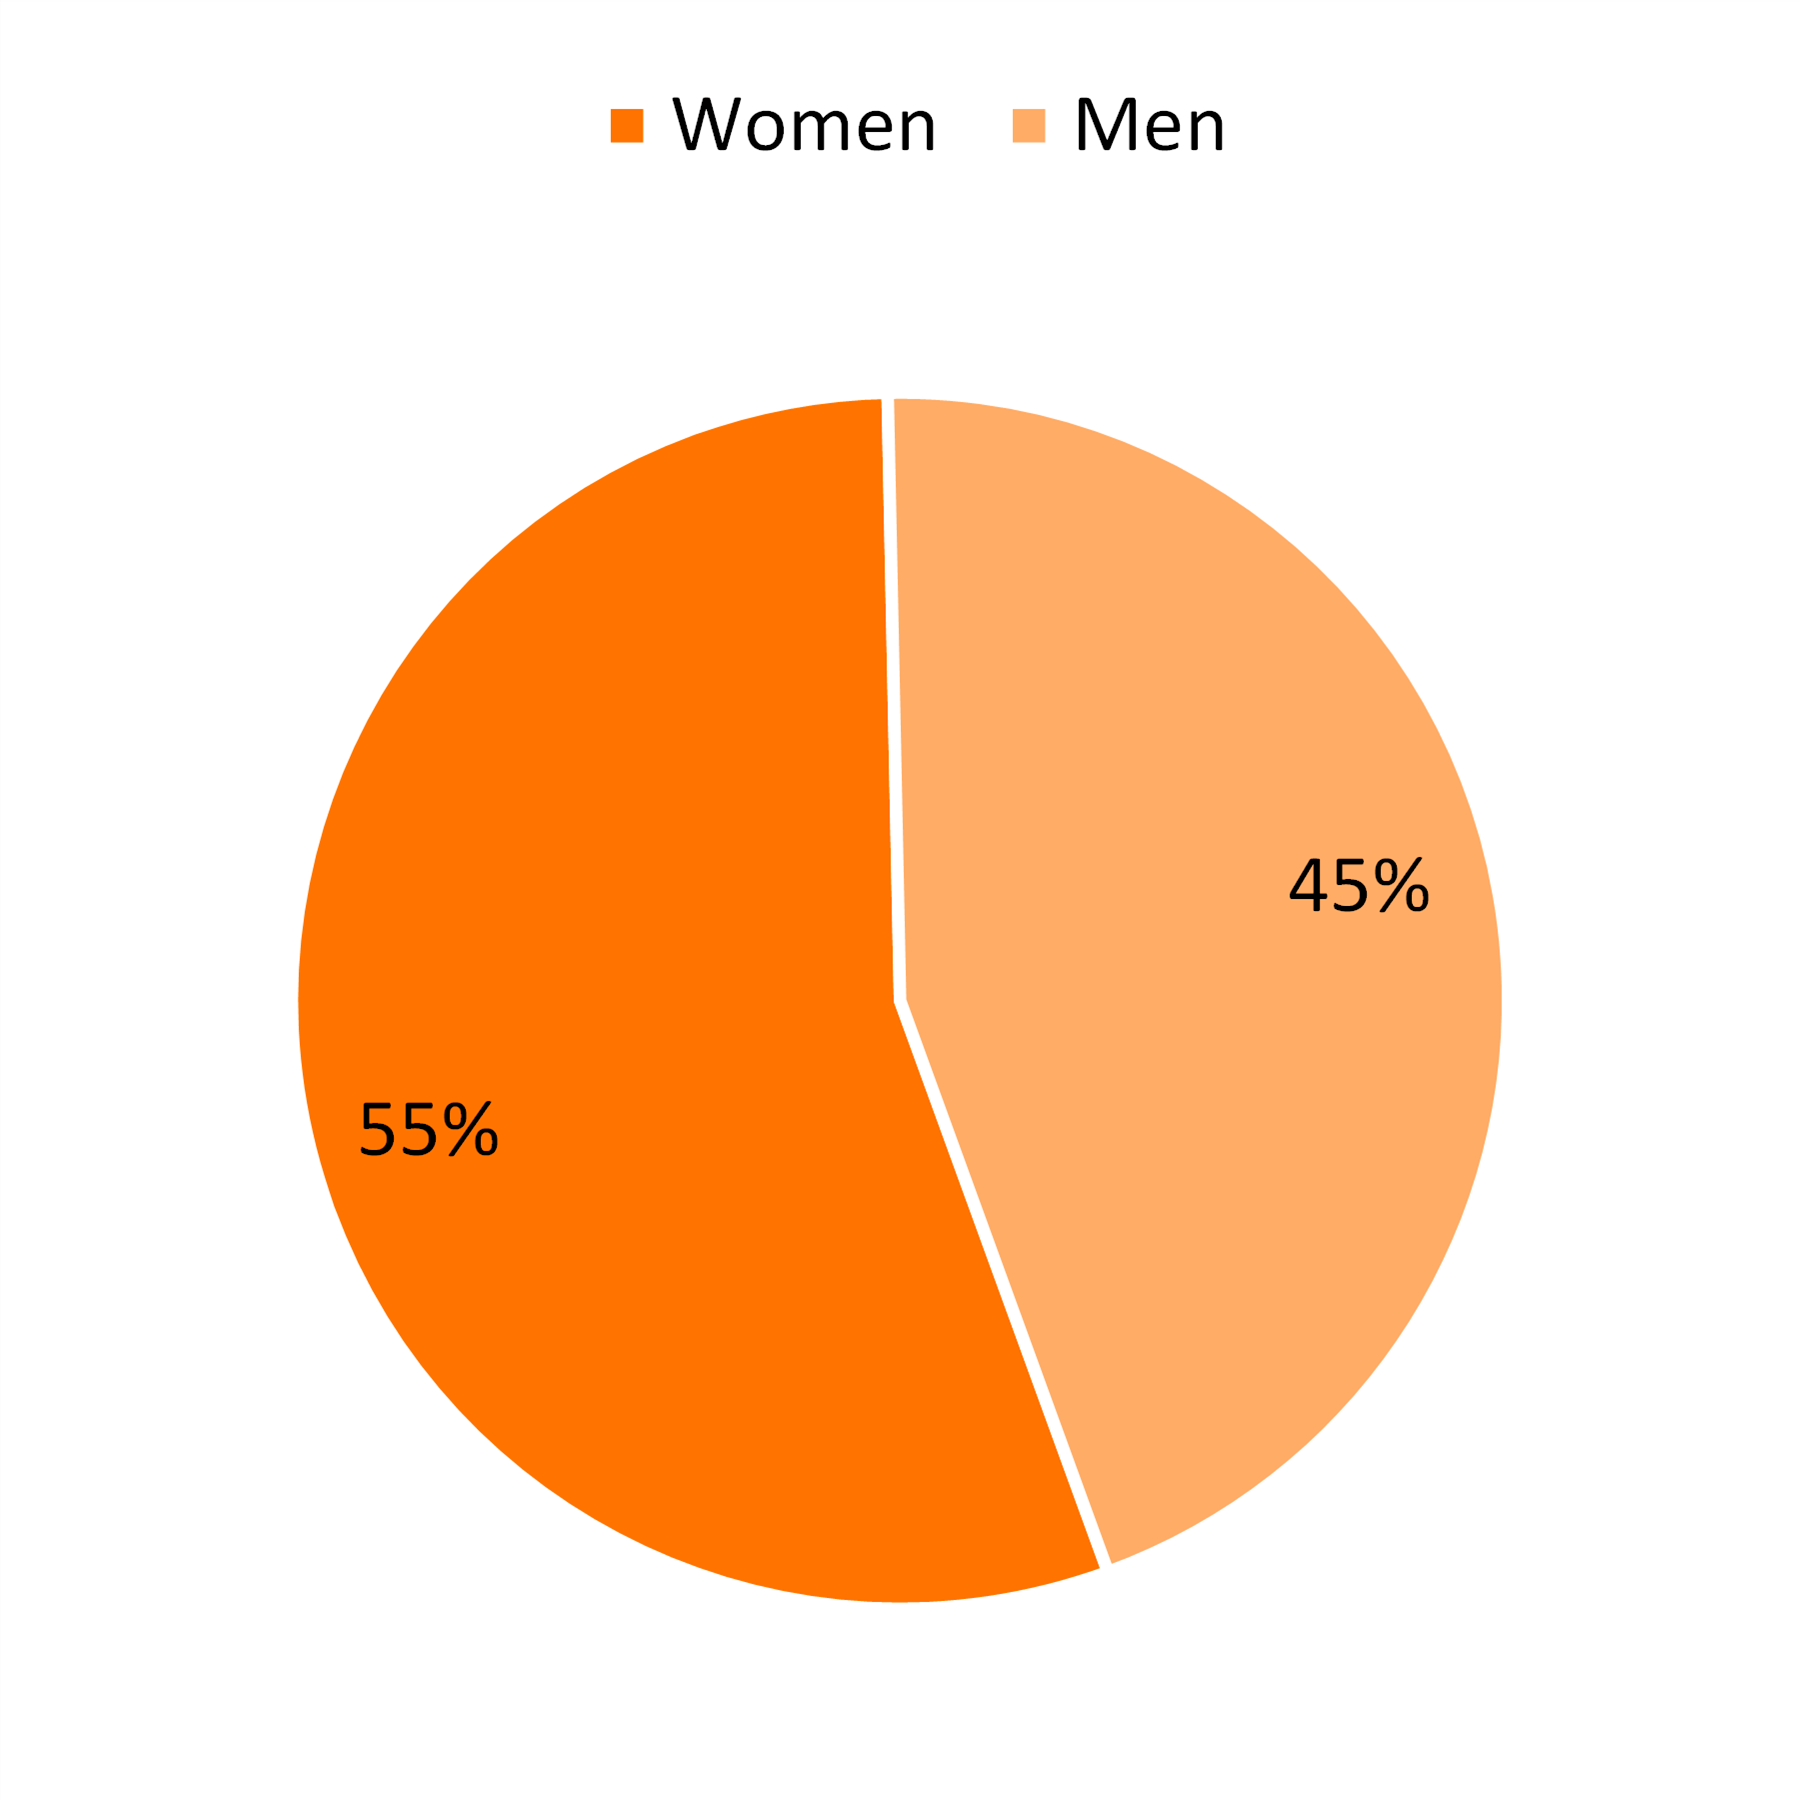 Pie chart showing Source: NCFMR calculations of the American Community Survey 1-year estimates, 2019